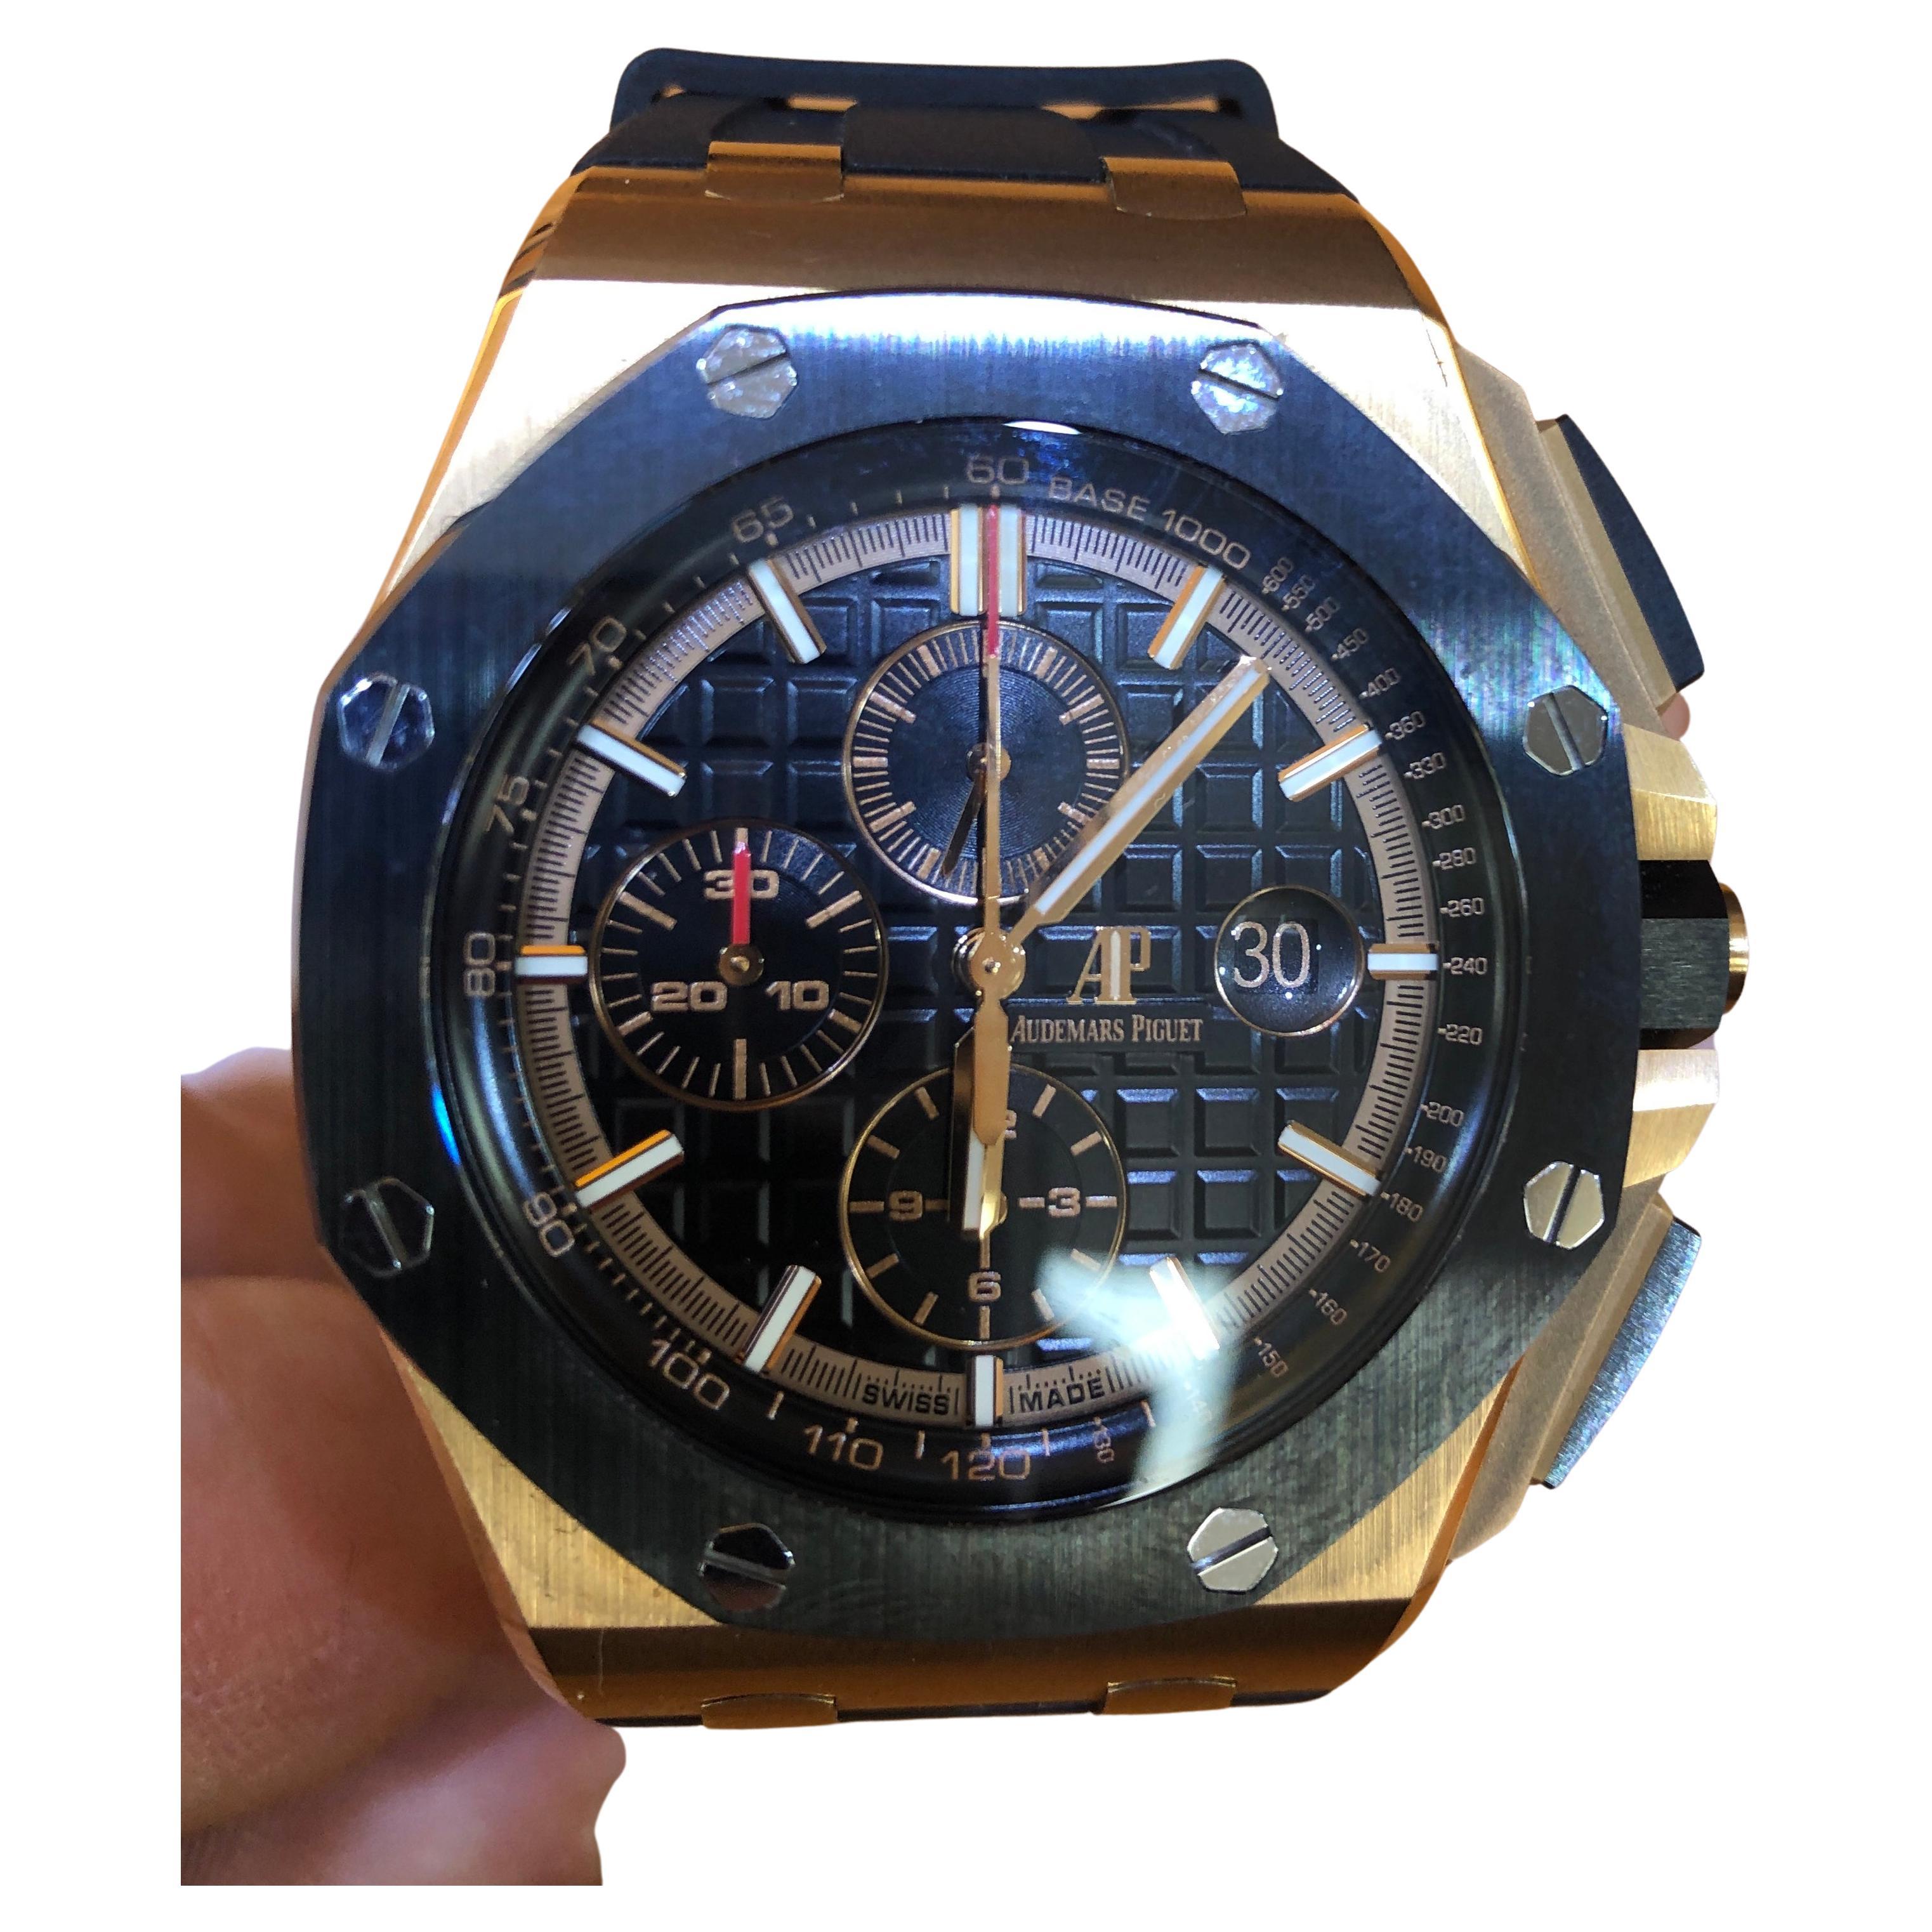 Audemars Piguet Royal Oak Offshore 44mm 18k Gold Watch

worn maybe twice

2021 model 41mm ceramic bezel

Complete set box and papers
